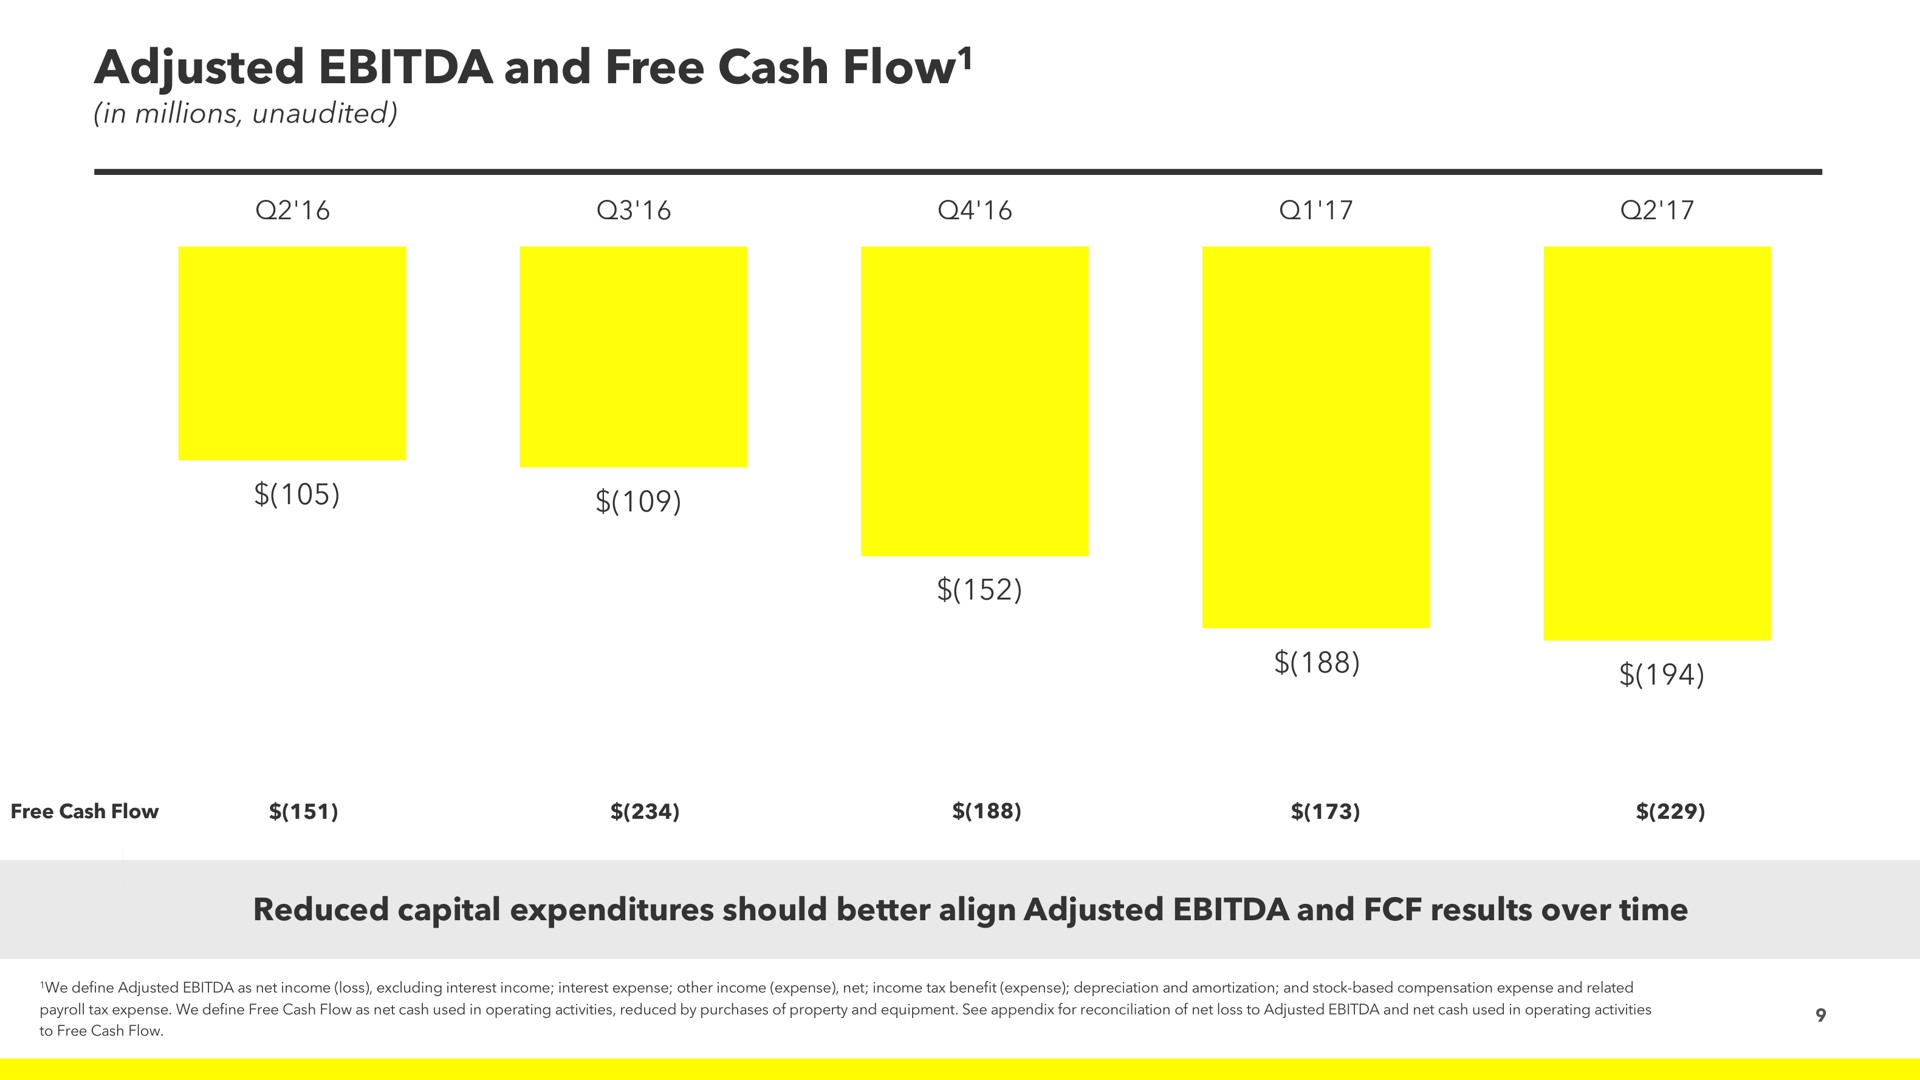 adjusted and free cash flow flow reduced capital expenditures should better align results over time | Snap Inc